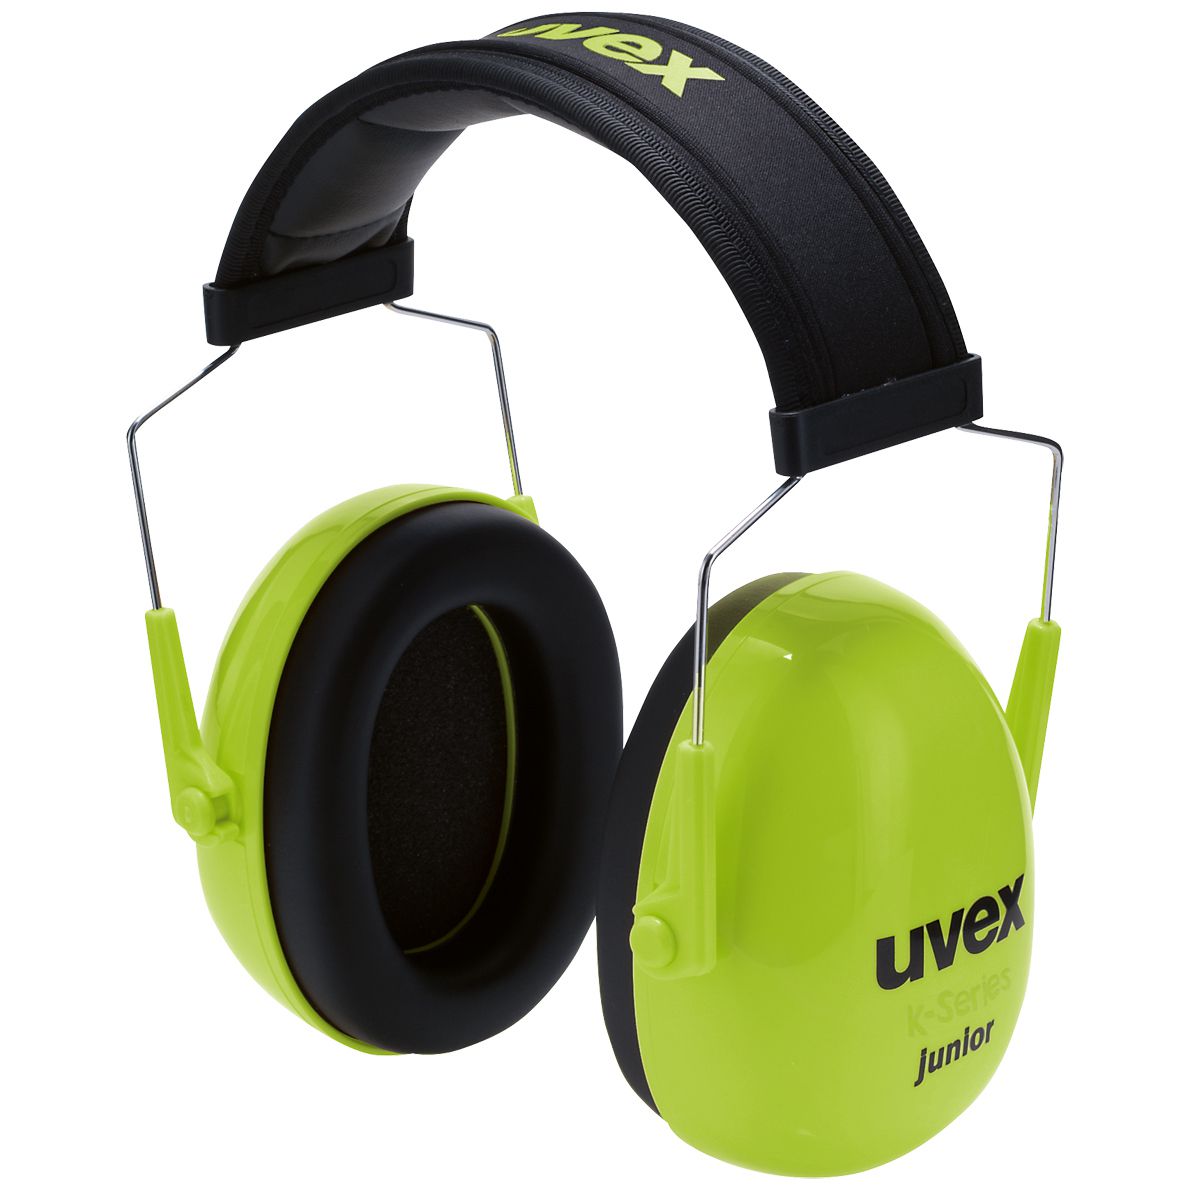 uvex Safety K junior earmuffs for children SNR 29, optimum protection up to 109 dB, lime